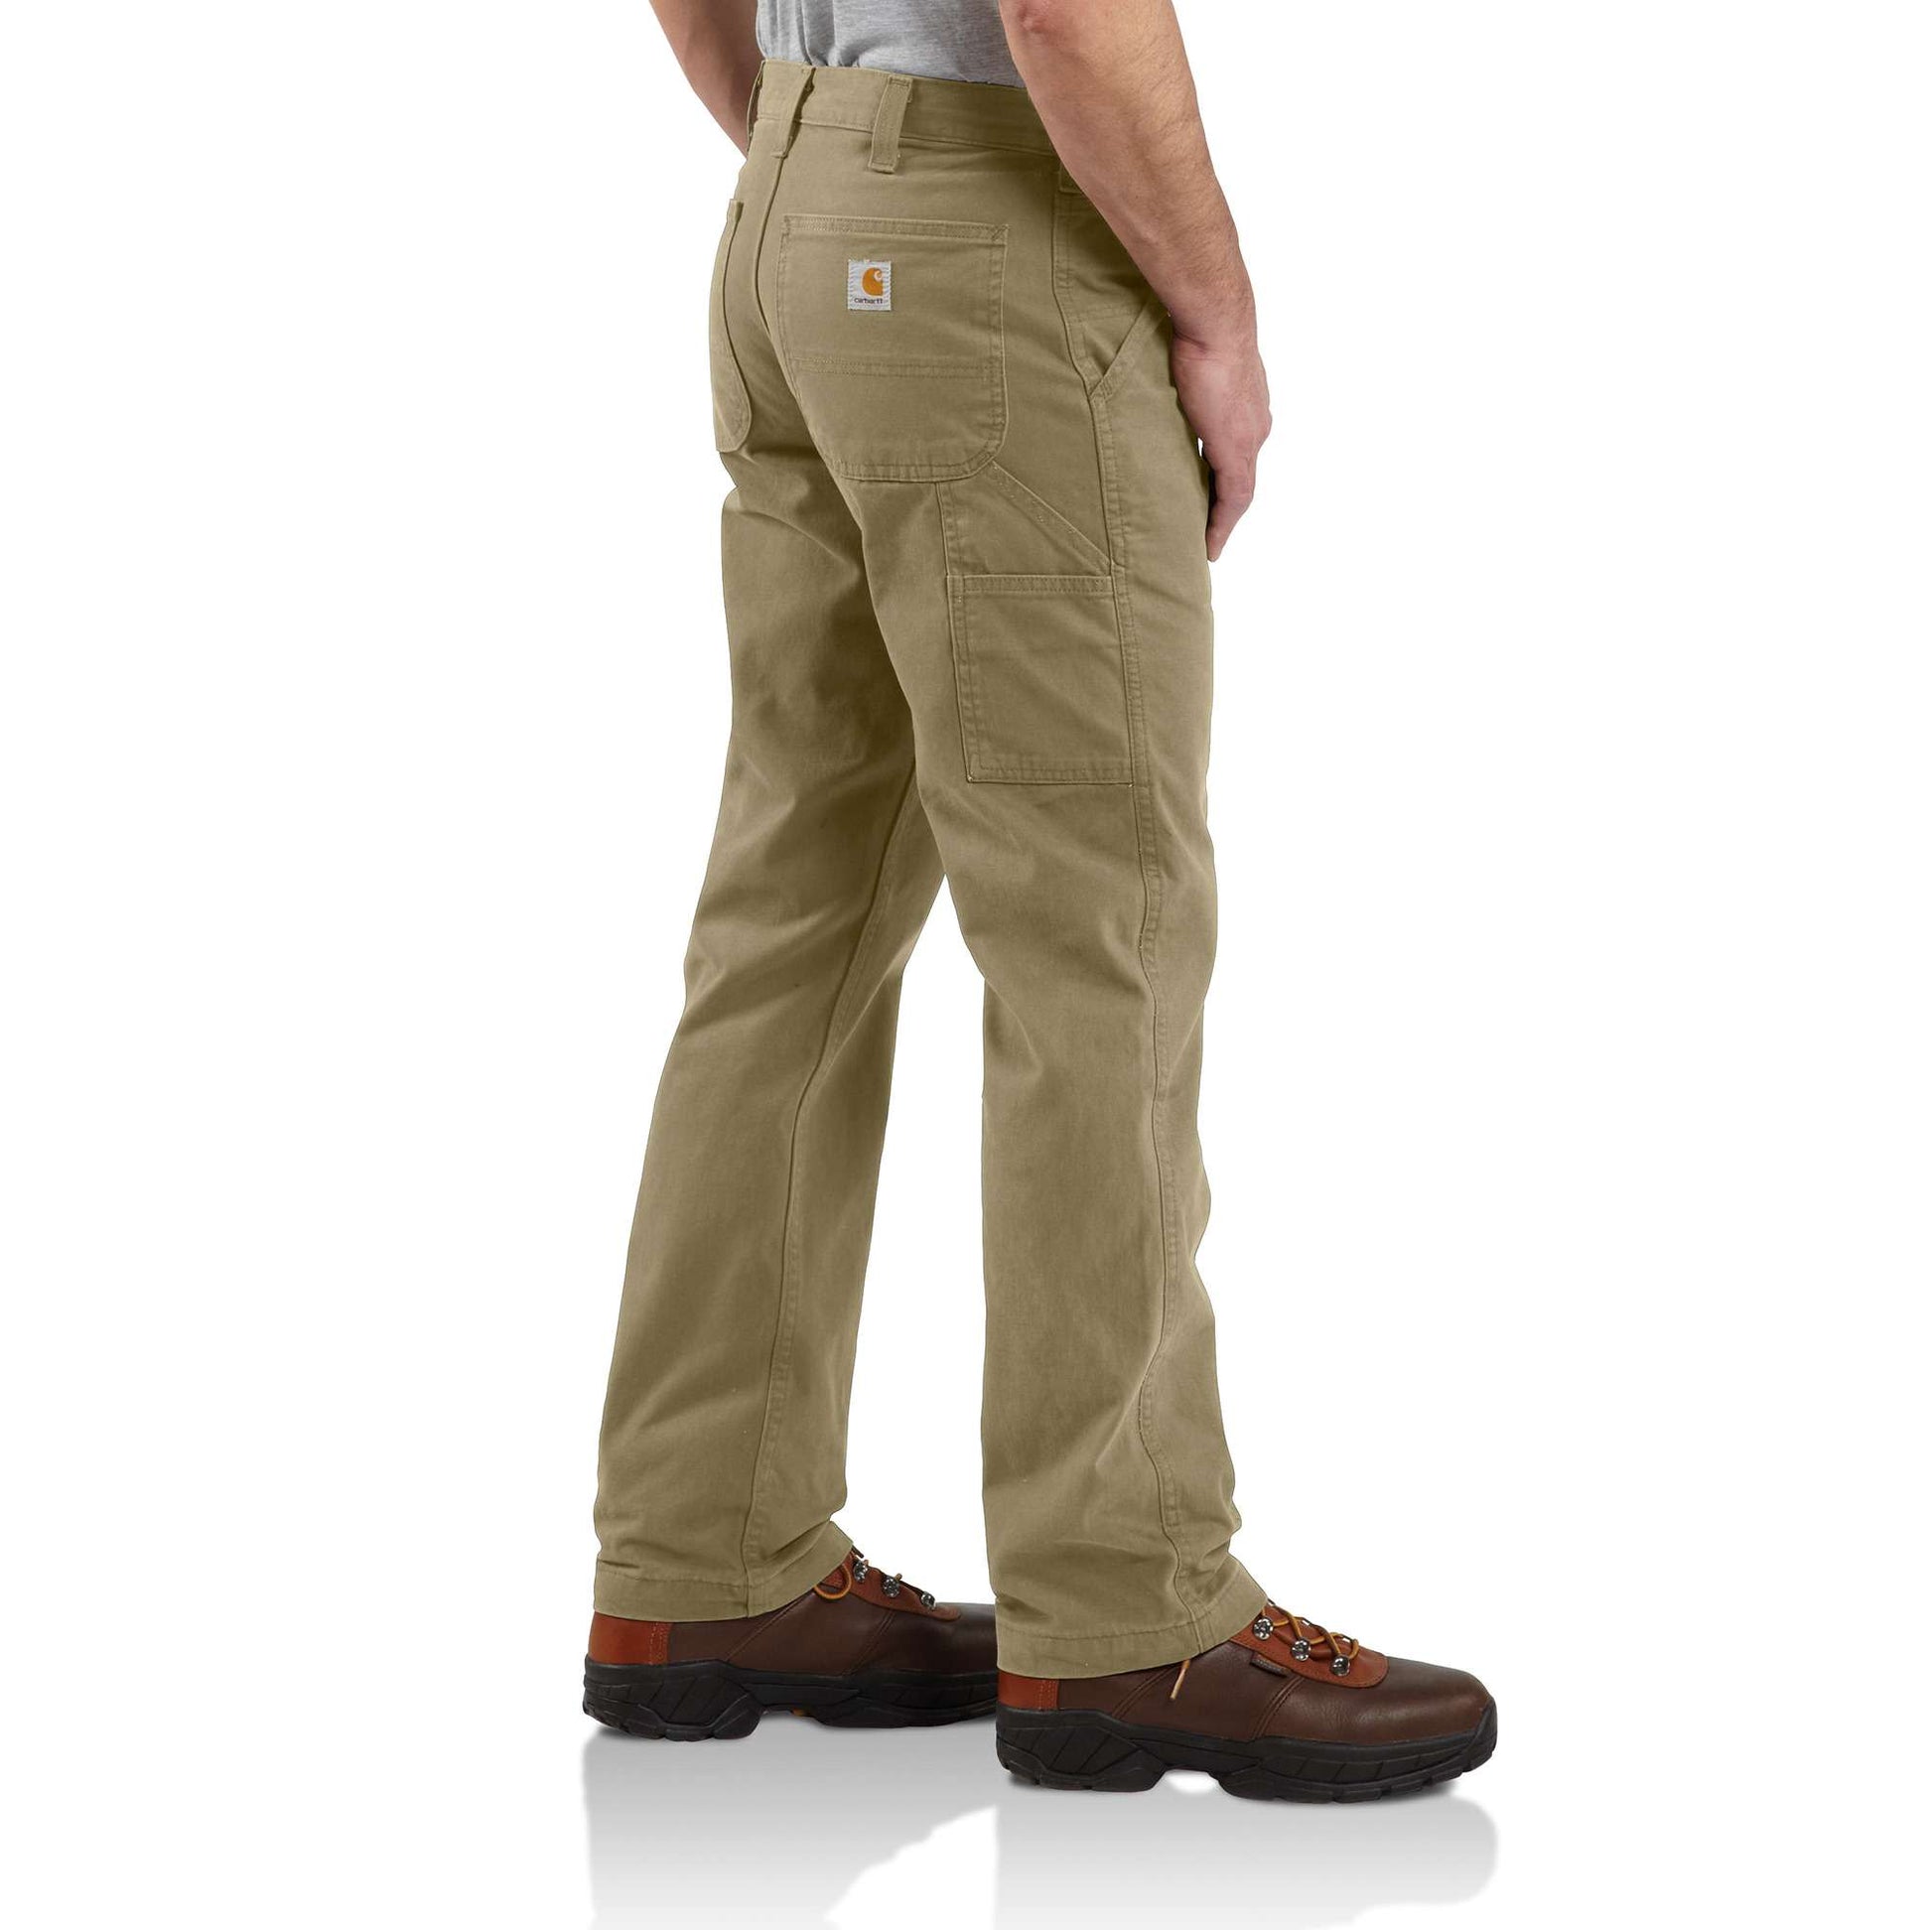 Carhartt Men's Washed Twill Work Pants B324 – Good's Store Online